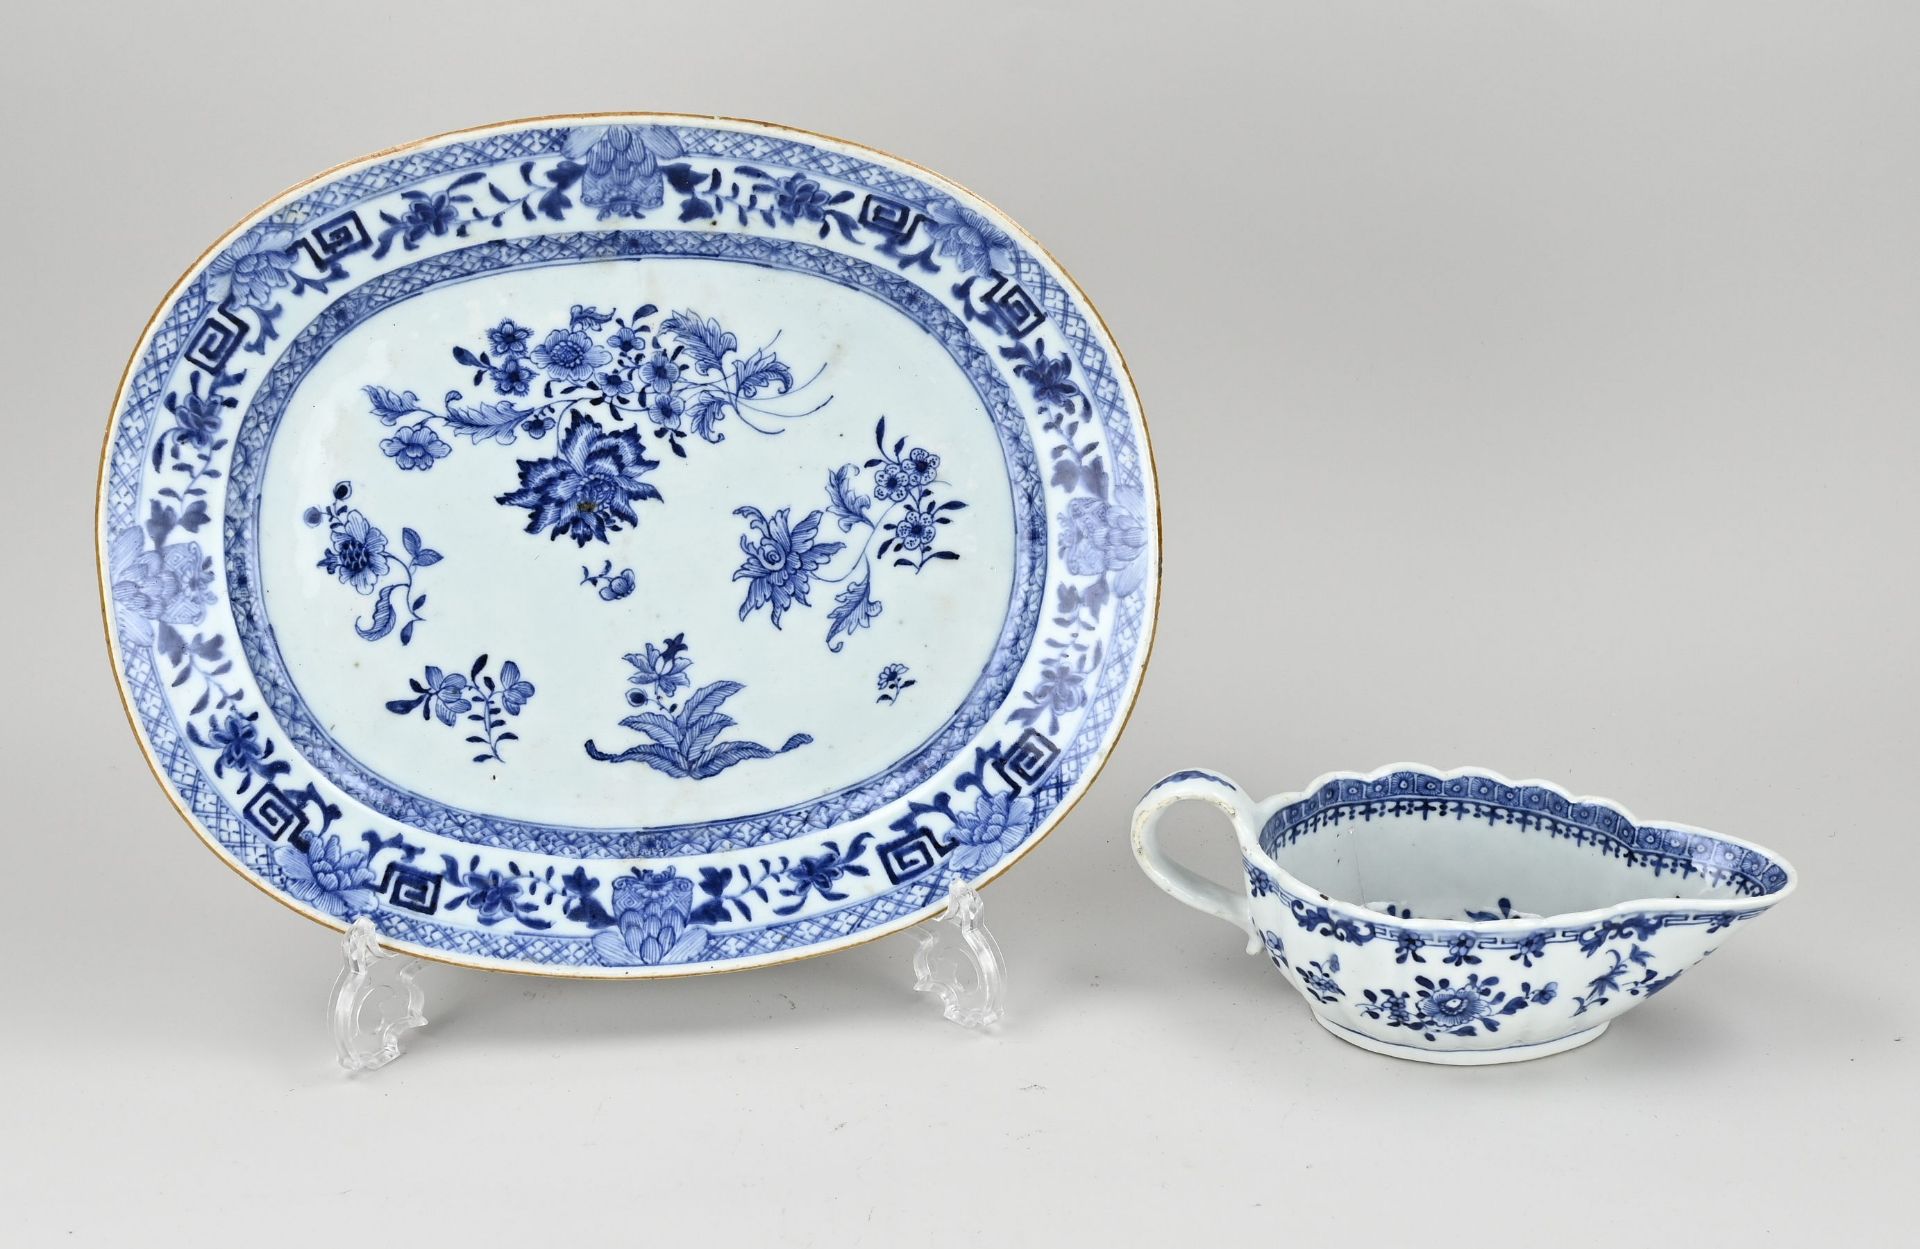 Two parts of Chinese porcelain